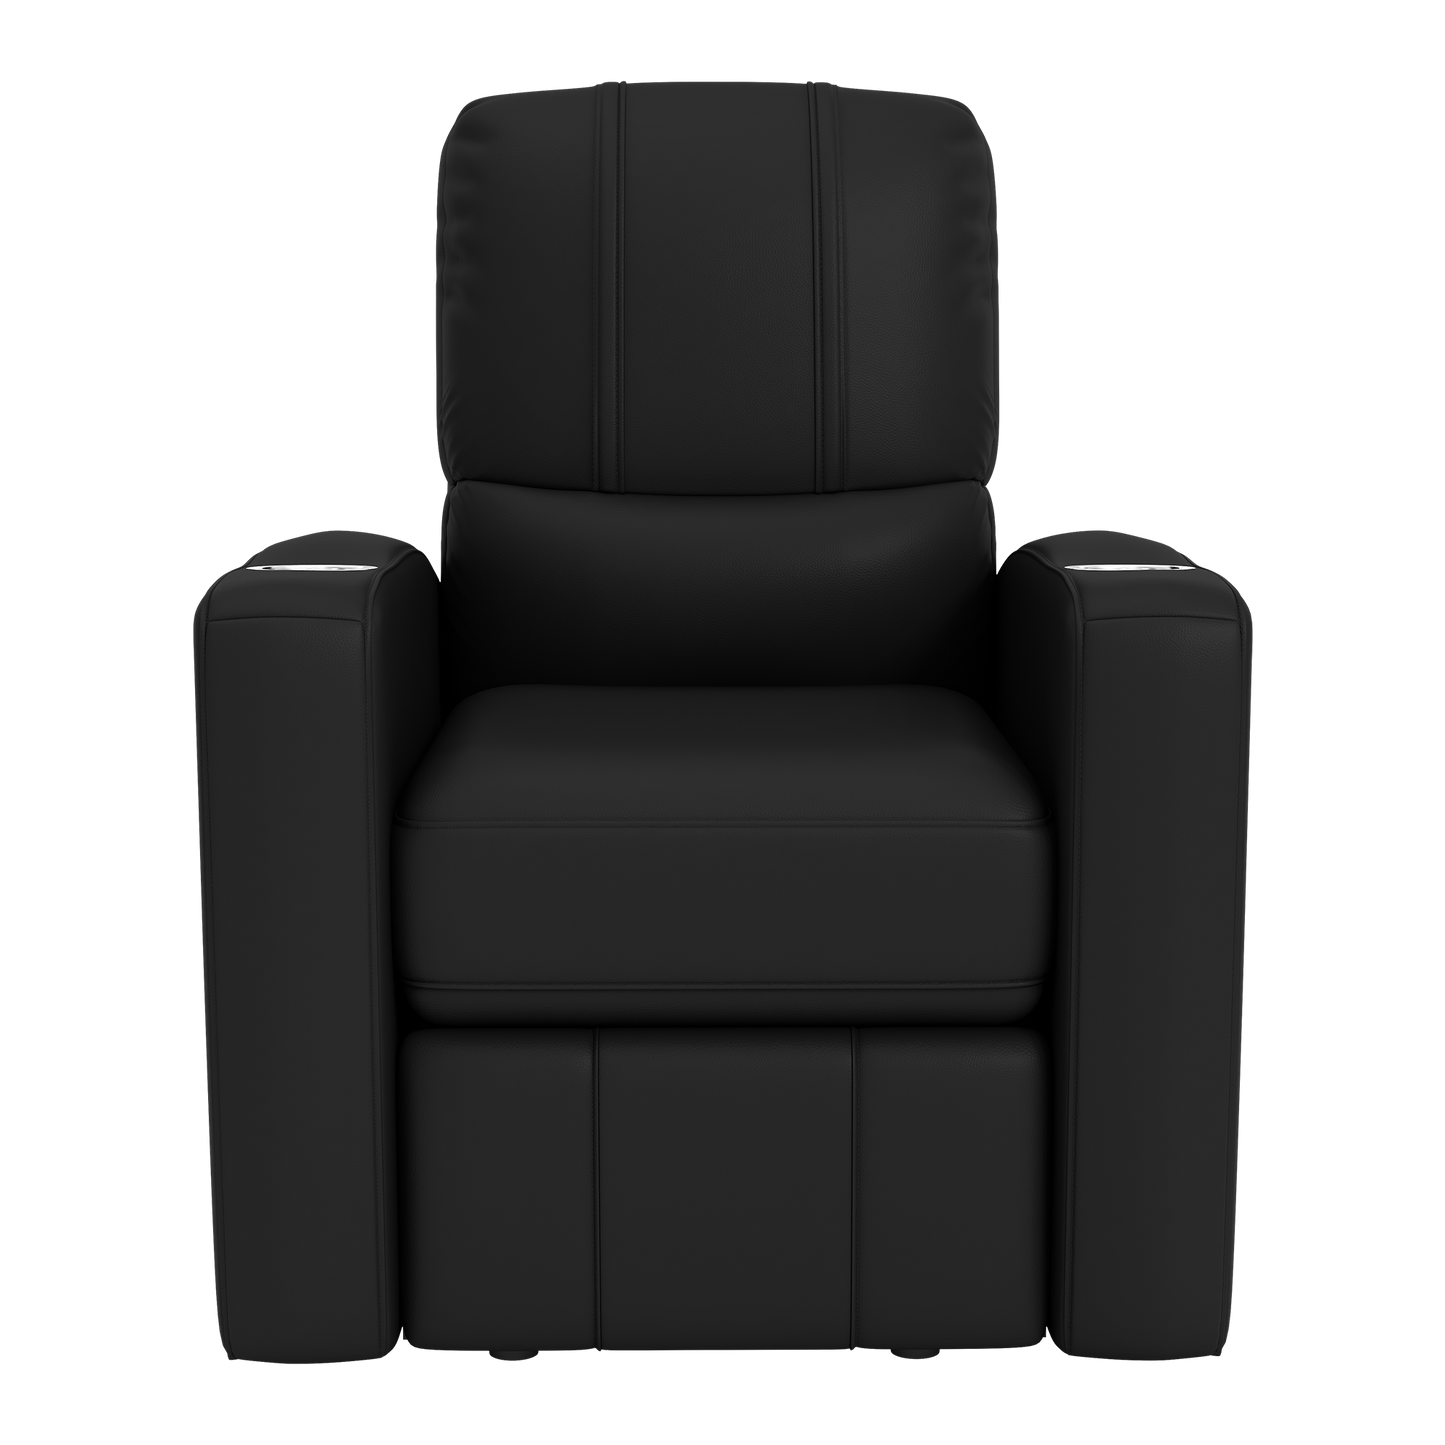 Stealth Recliner with Western Michigan University Logo